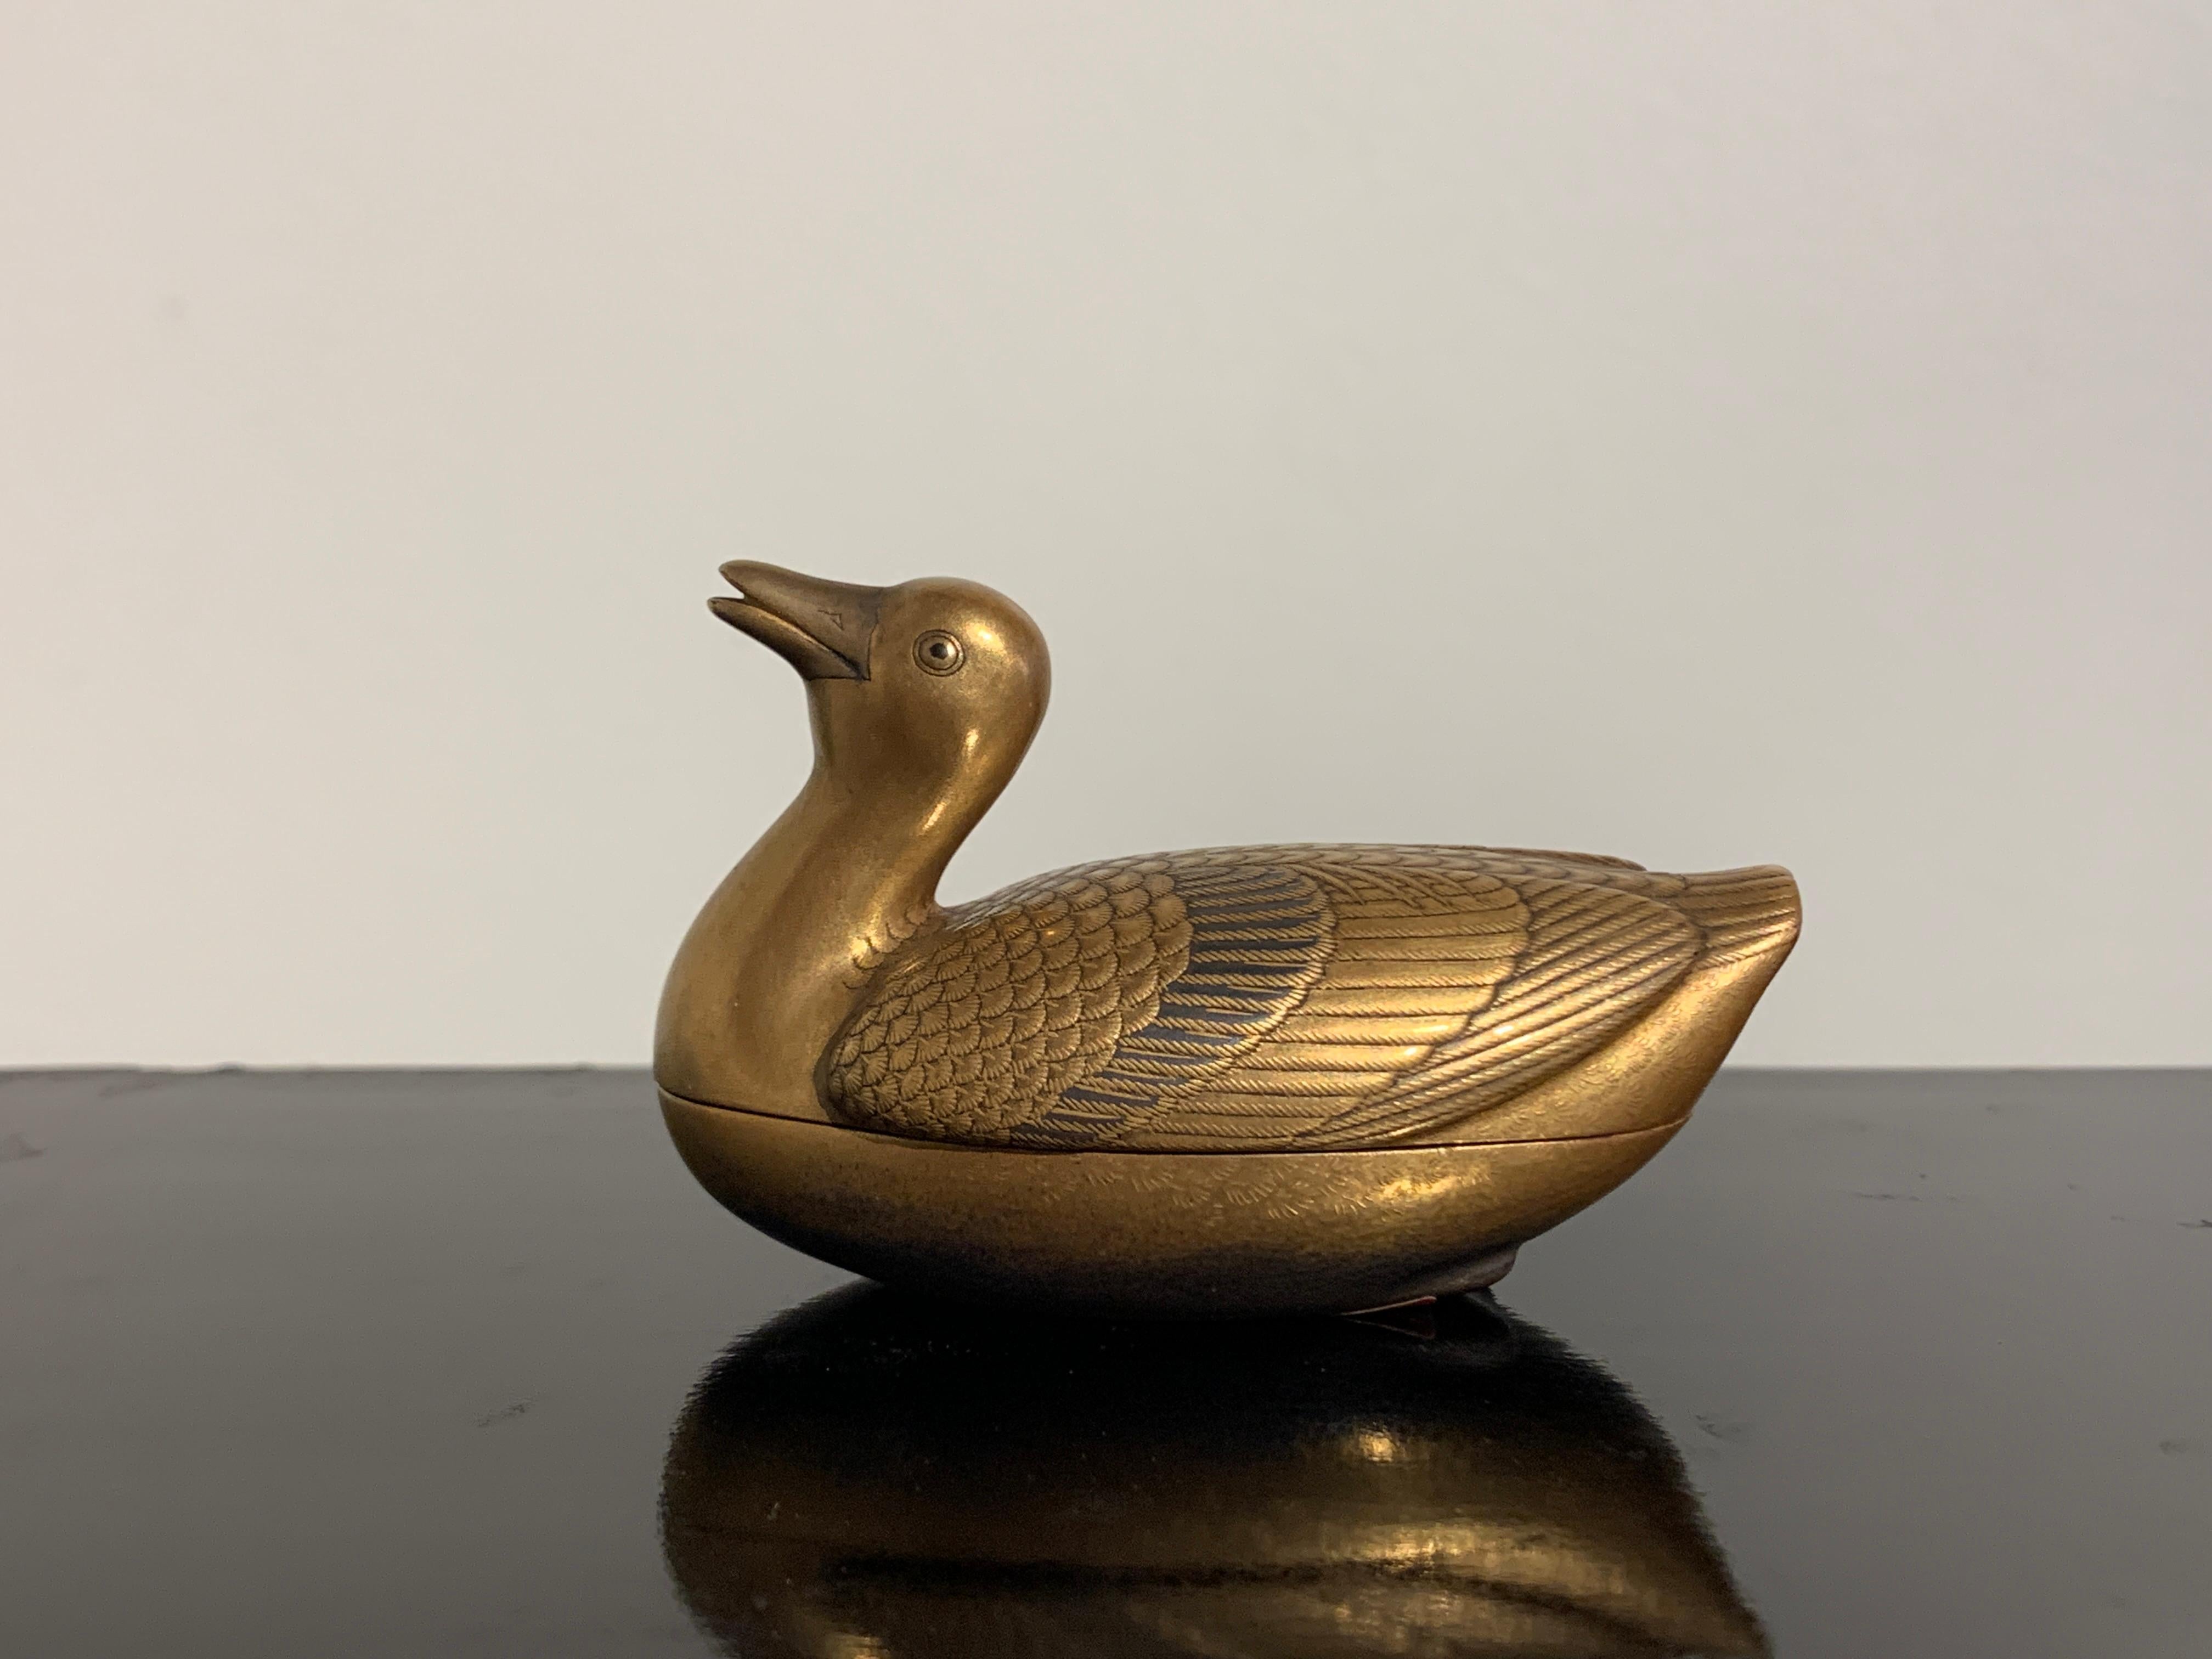 An exquisite Japanese Meiji Period small lacquer incense box, kogo, in the form of a duck or goose, late 19th century, Japan.

The delicate lacquer box, known as a kogo in Japanese, was originally used to hold precious incense. 
Finely crafted out